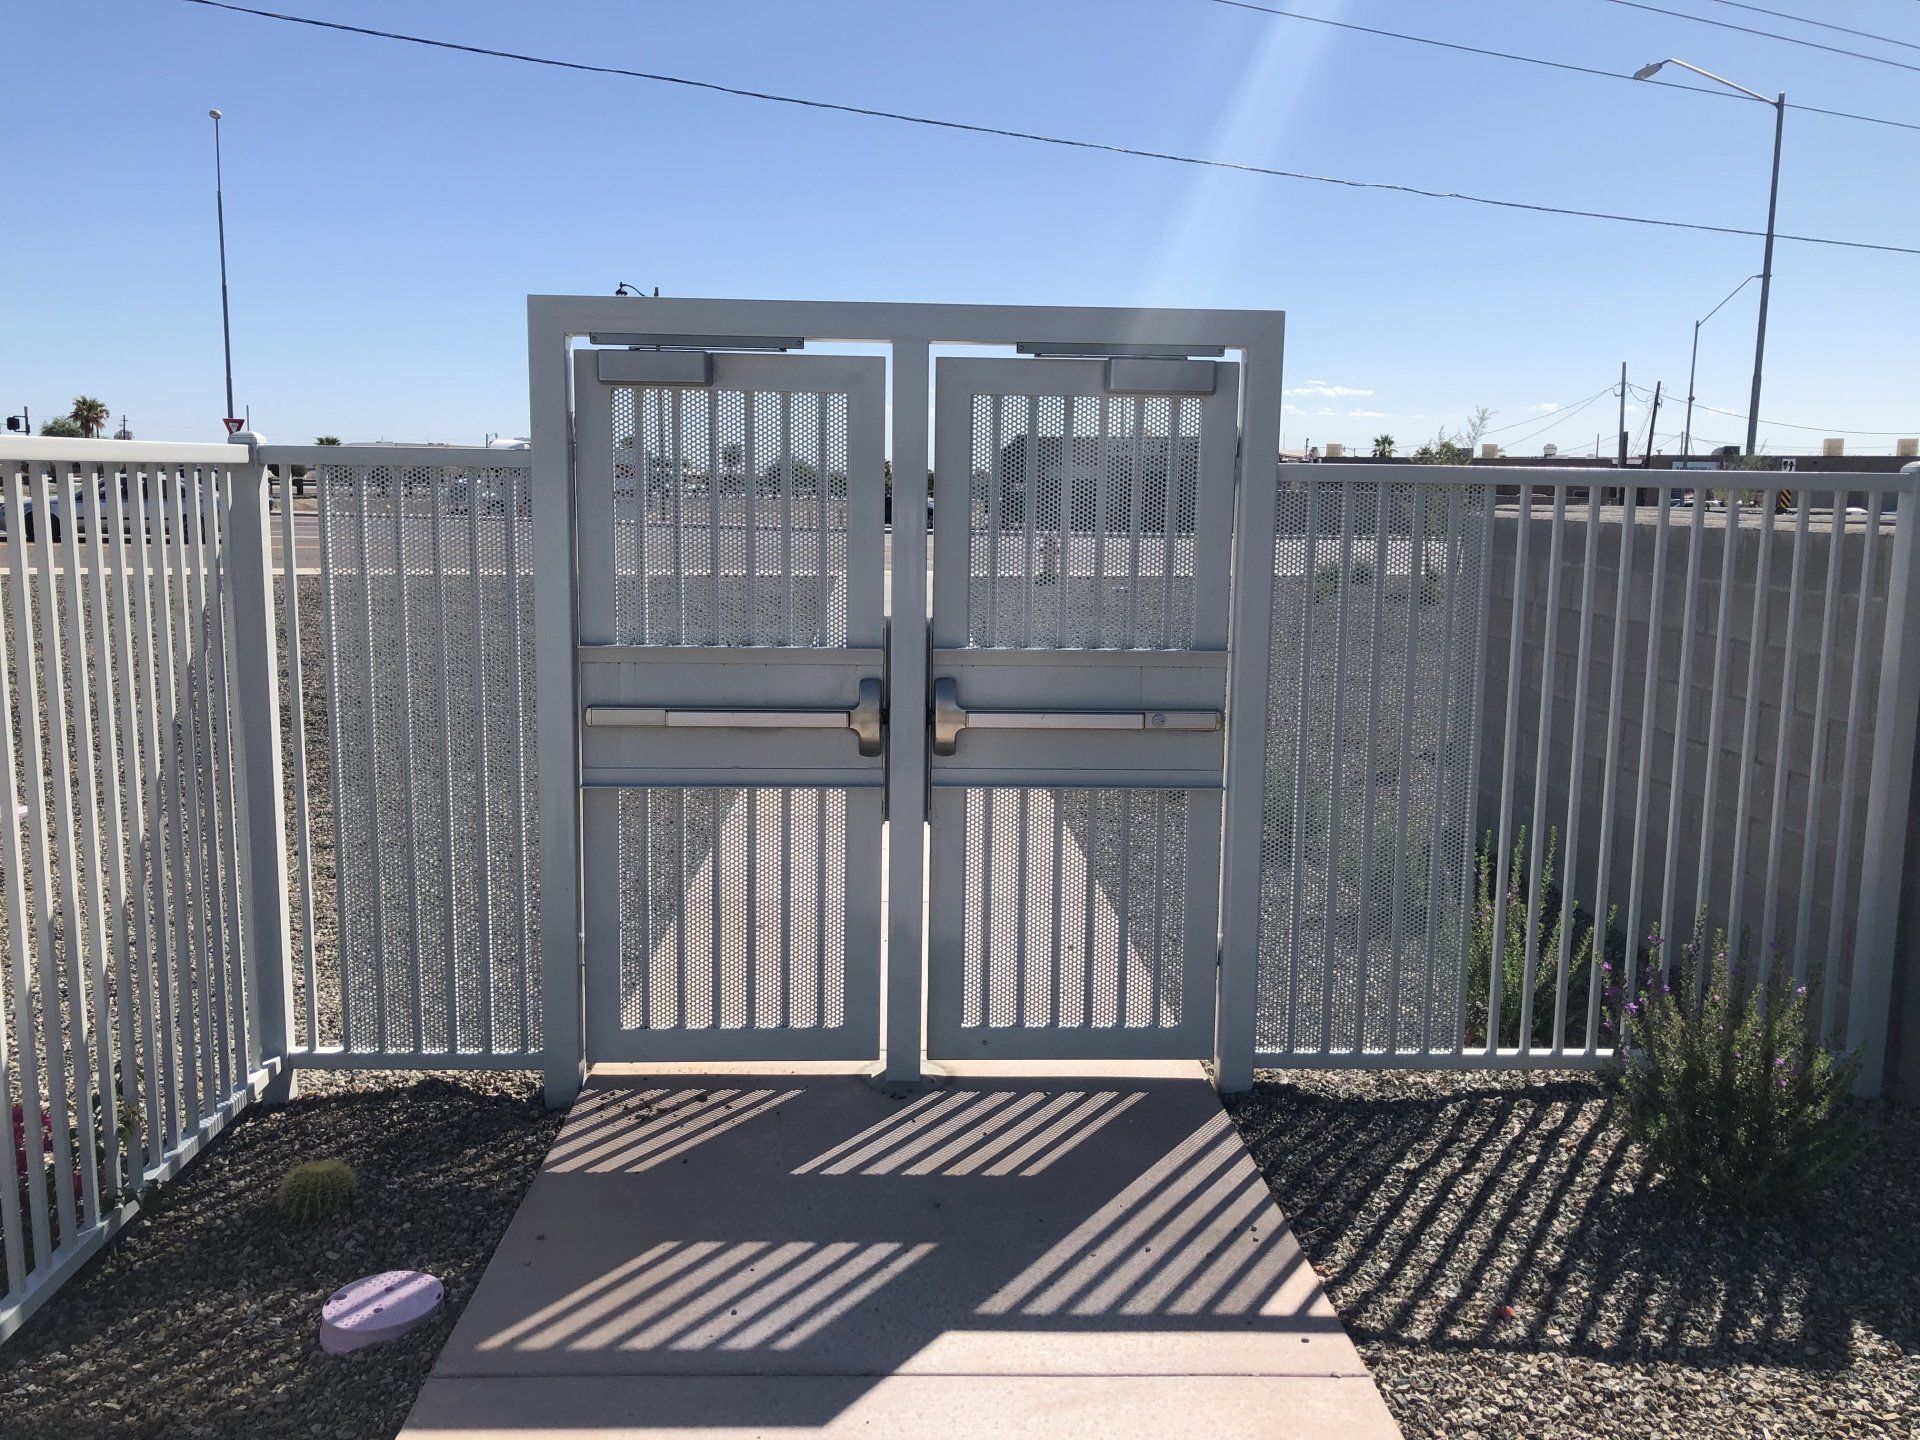 West Mec Northwest Campus Double Gate with Panic Bars